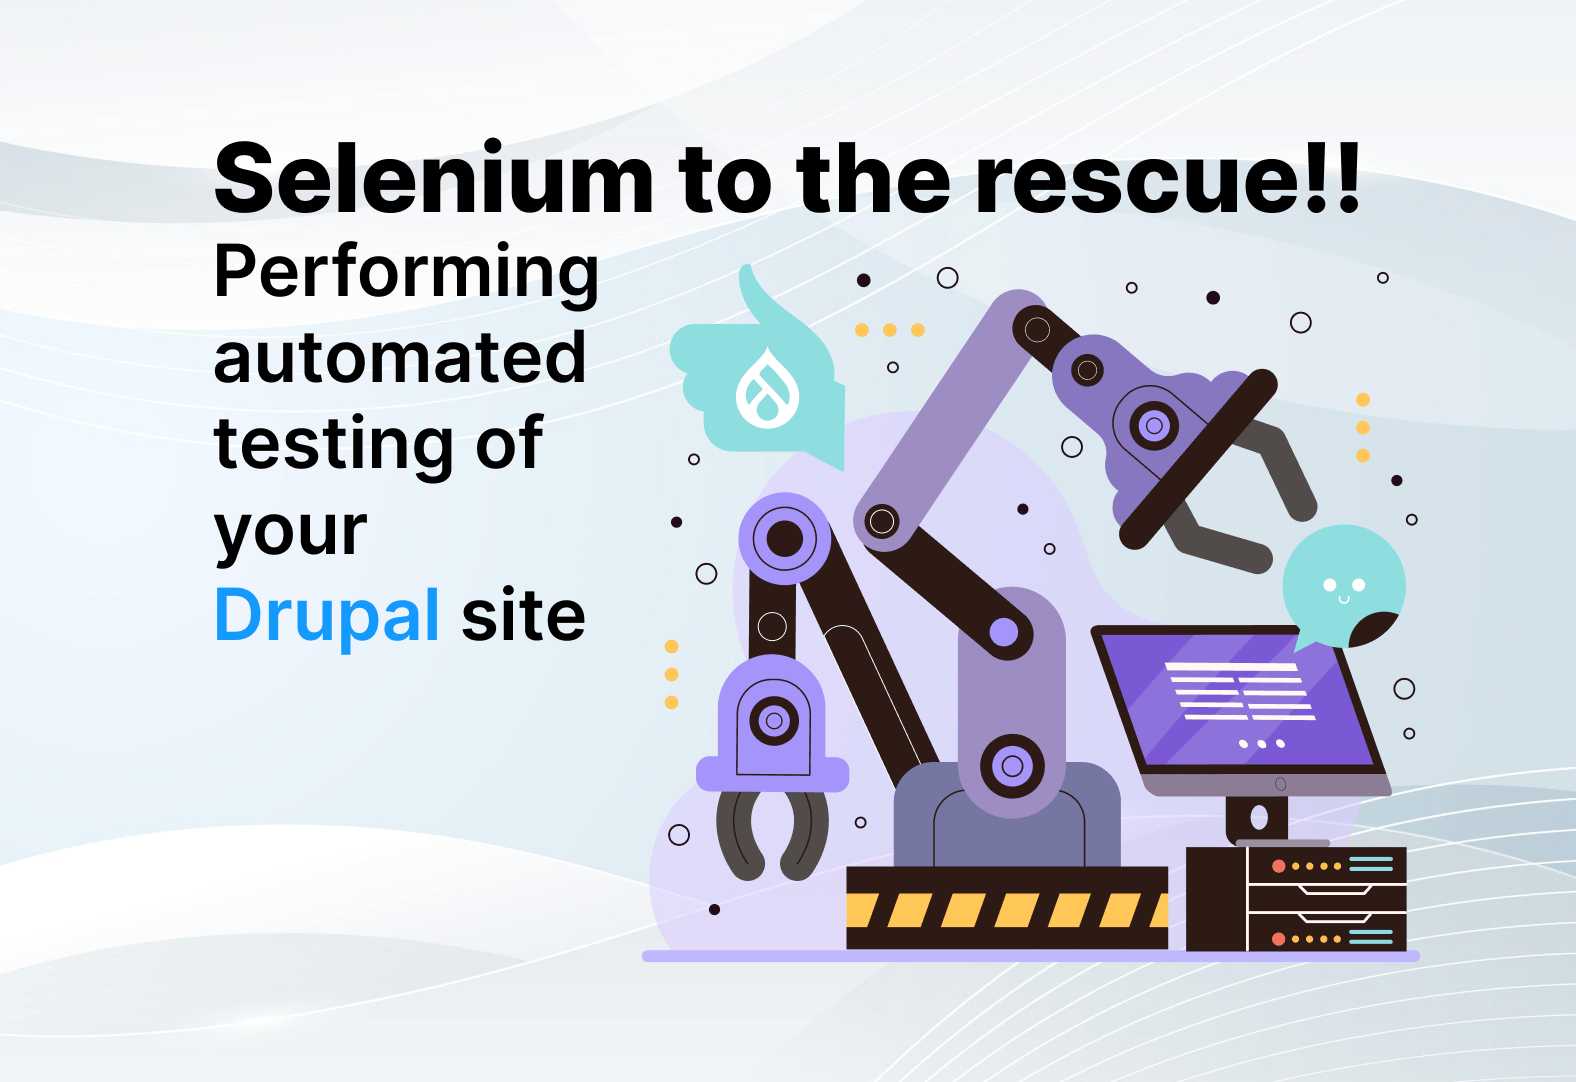 Selenium to the rescue! Performing automated testing of your Drupal site image